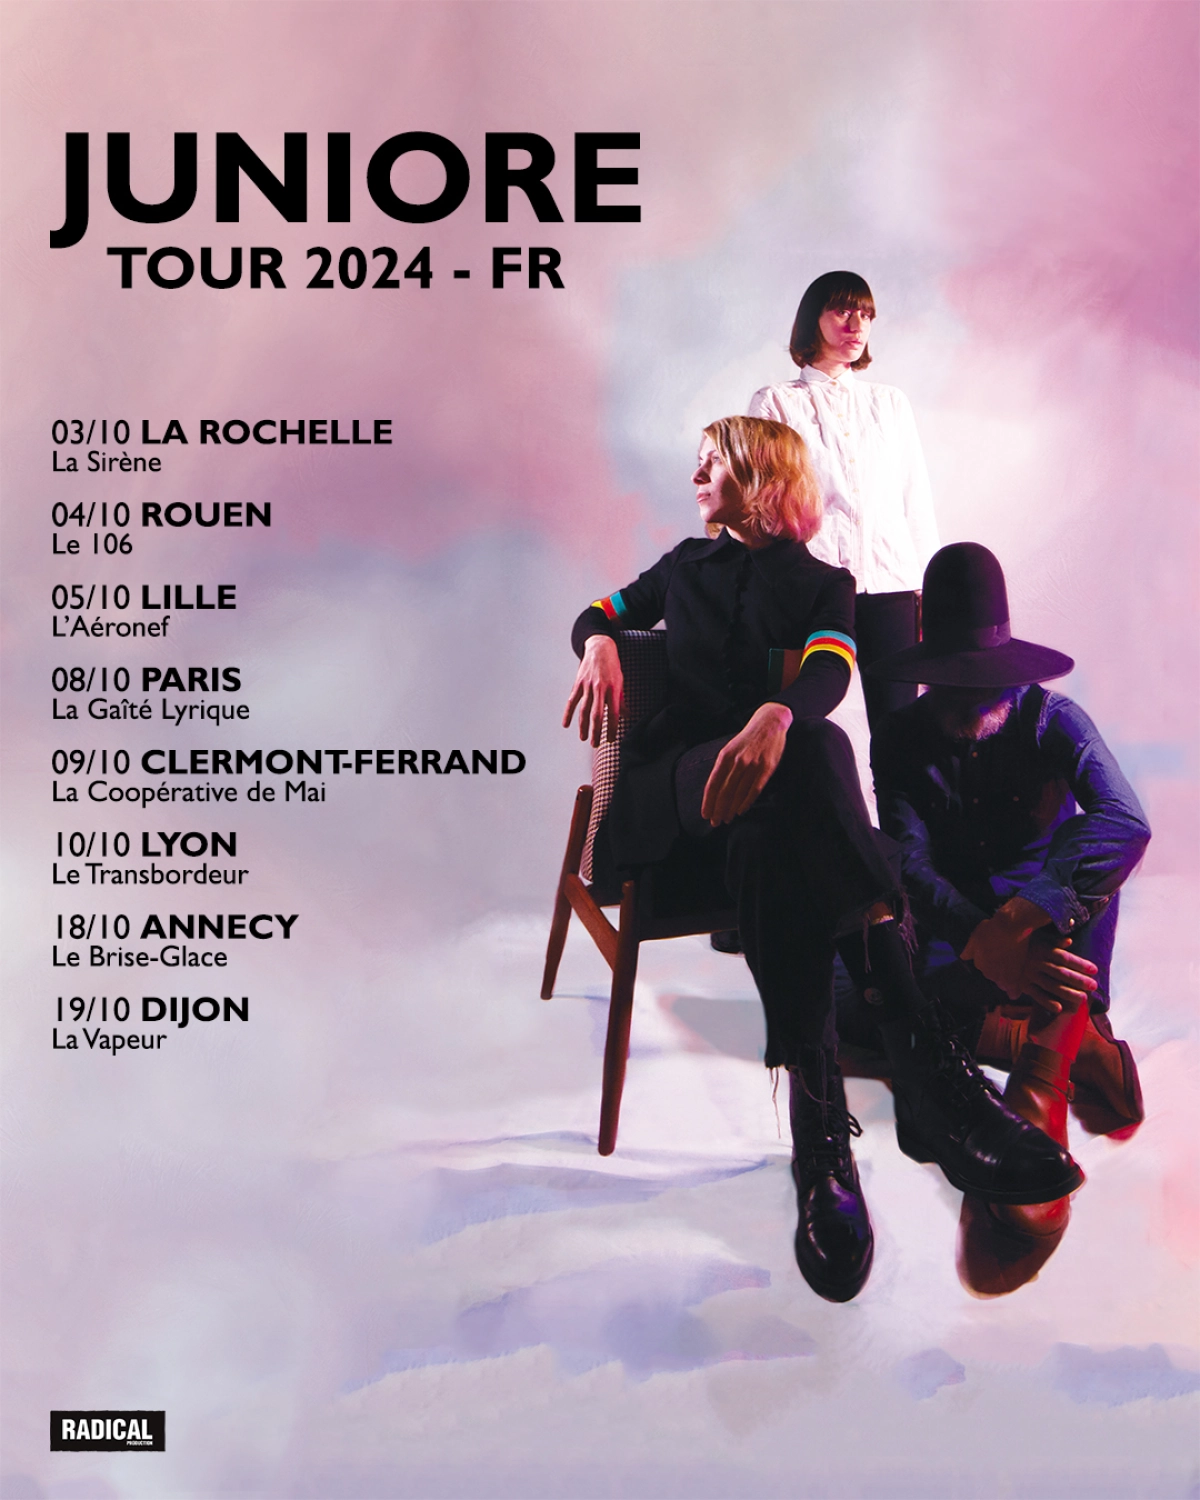 Juniore at Le 106 Tickets